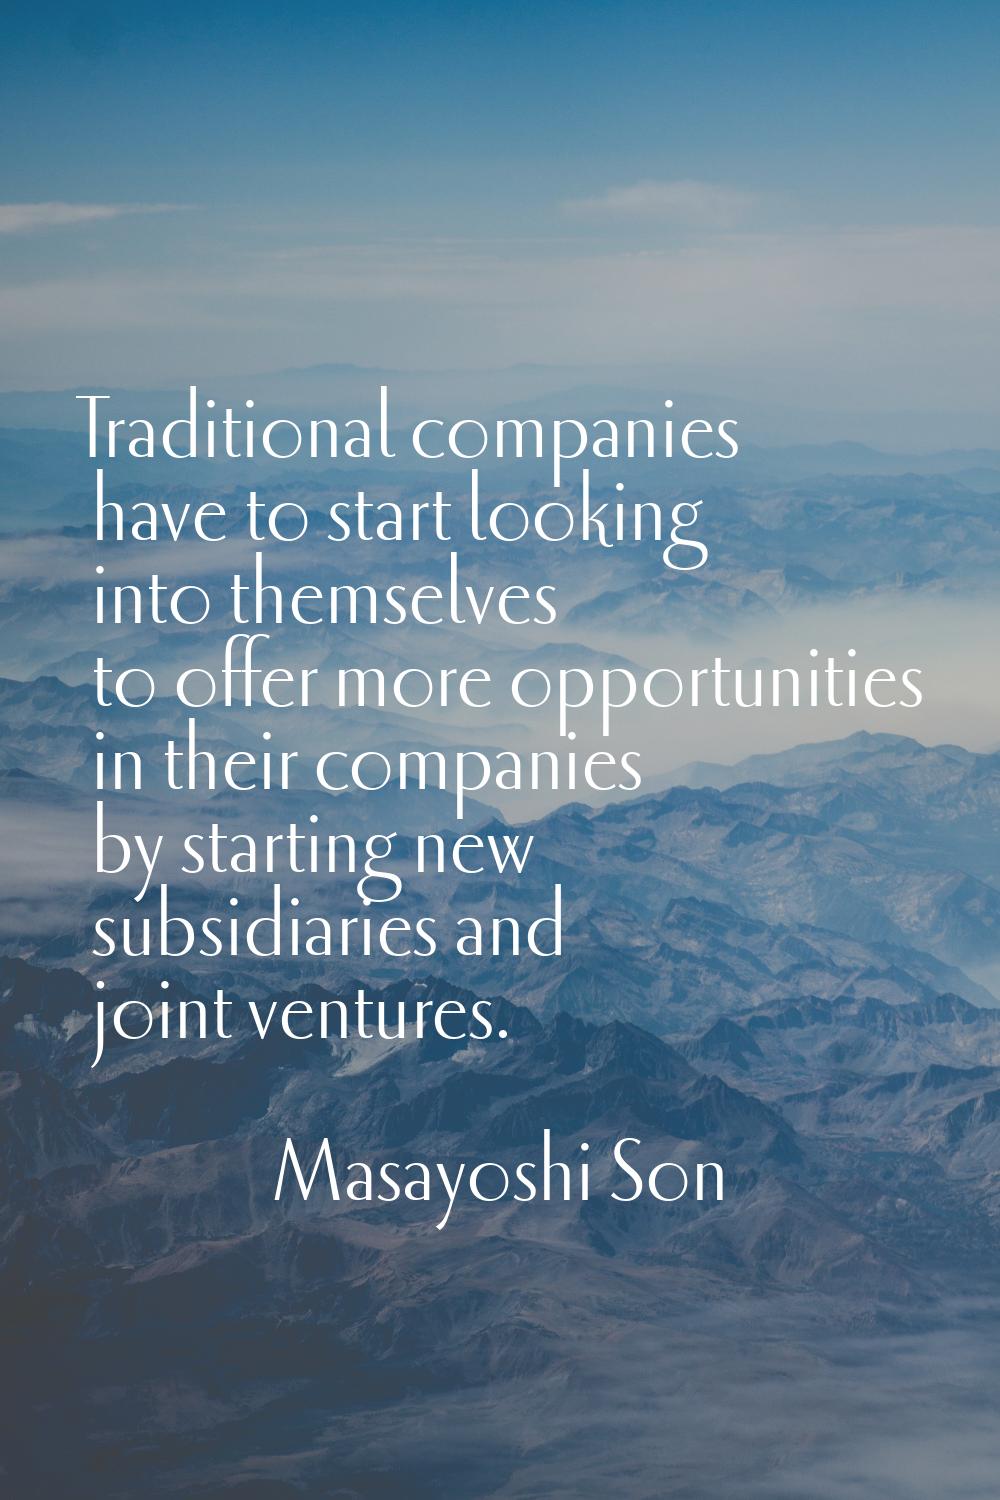 Traditional companies have to start looking into themselves to offer more opportunities in their co